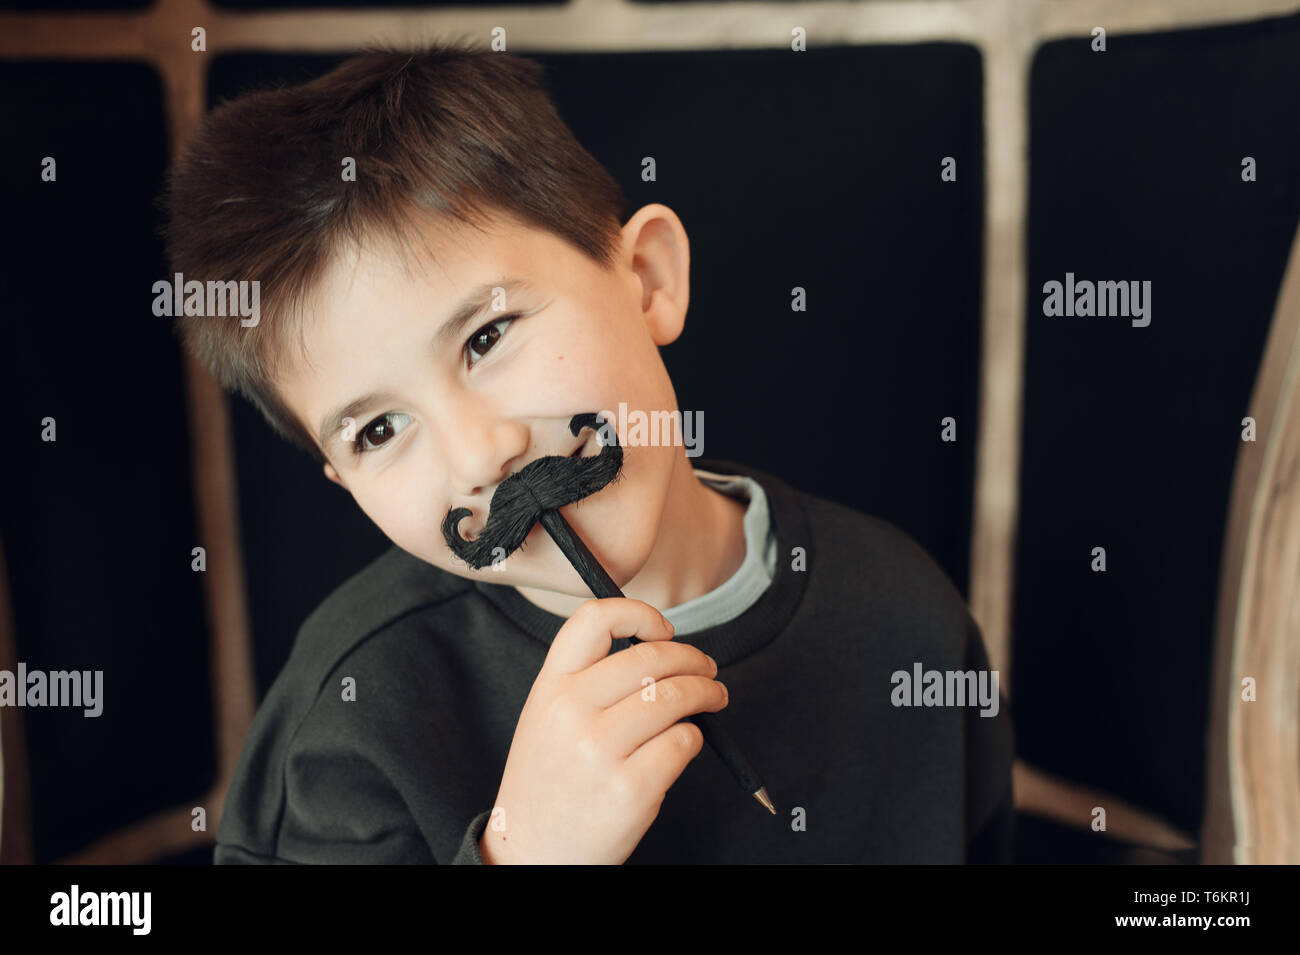 Happy kid posing with a fake moustache on black background Stock Photo